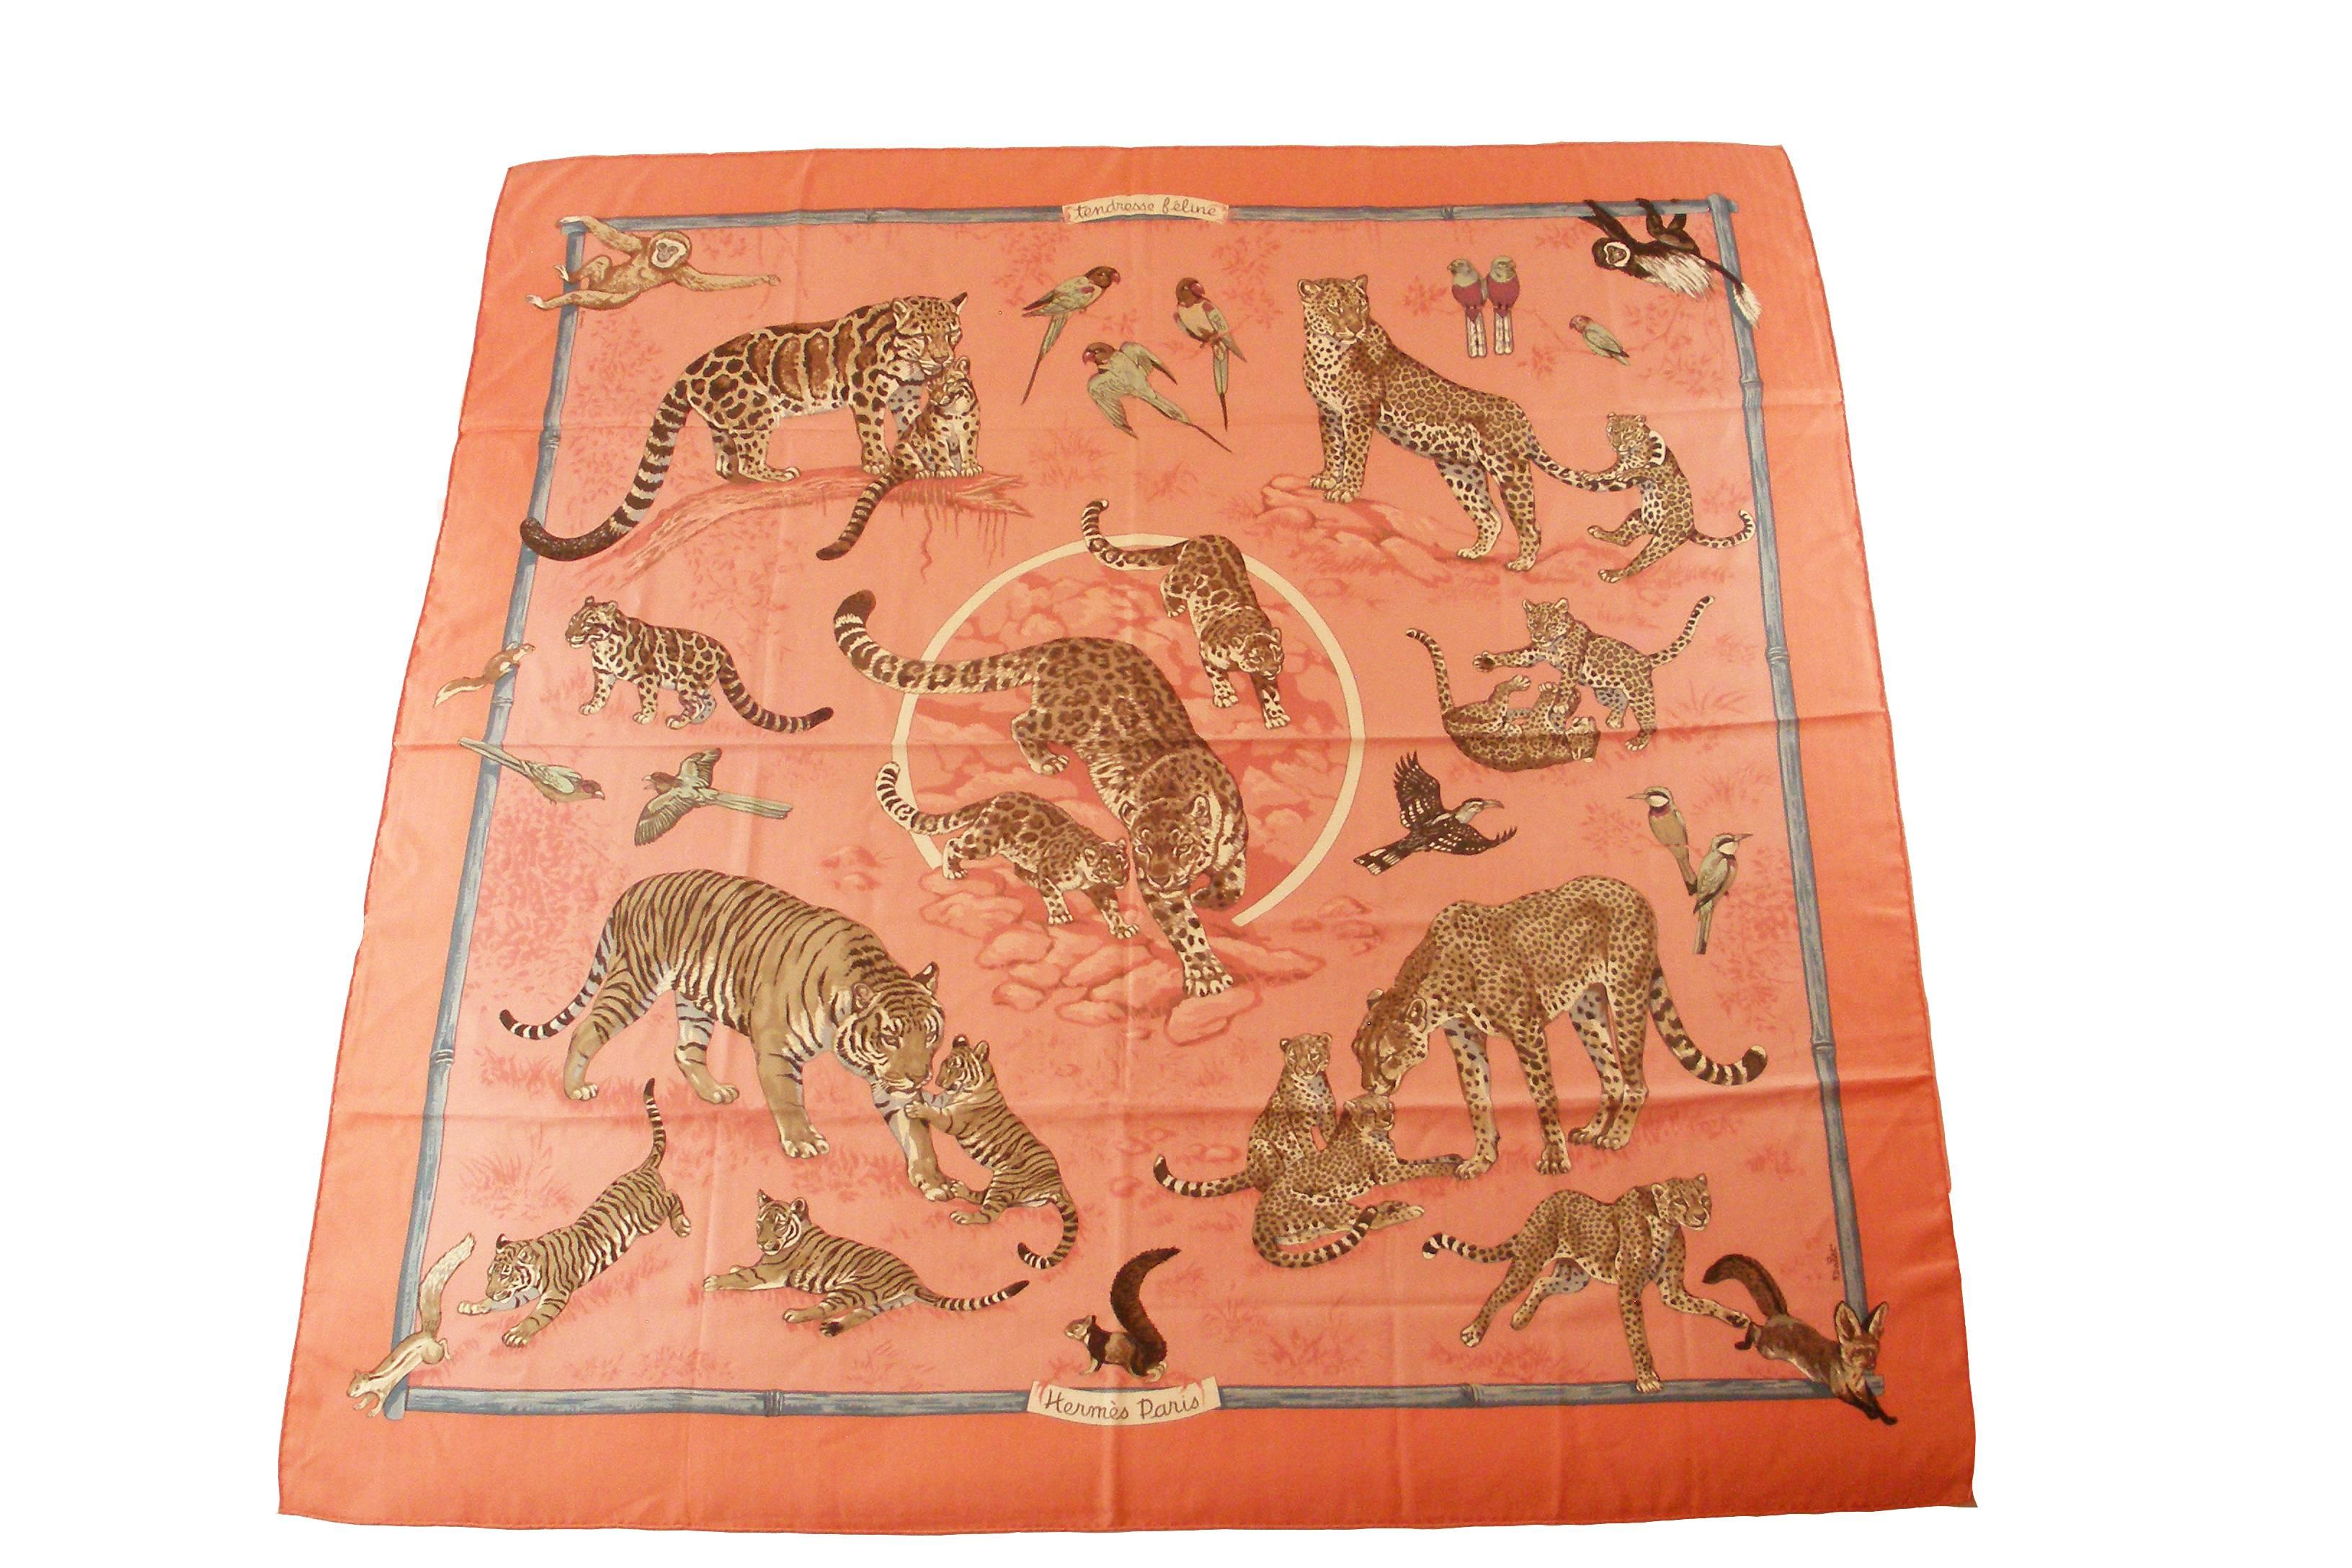 Impossible to find in Hermès shop 
HERMÈS Cashmere Silk Tendresse Féline140  
The exceptional quality and incredible beauty of this Hermes scarf makes it a fabulous fashion accessory.
Size : 140 x 140 cm or 55 x 55 inches
Color : rose buvard 
Its